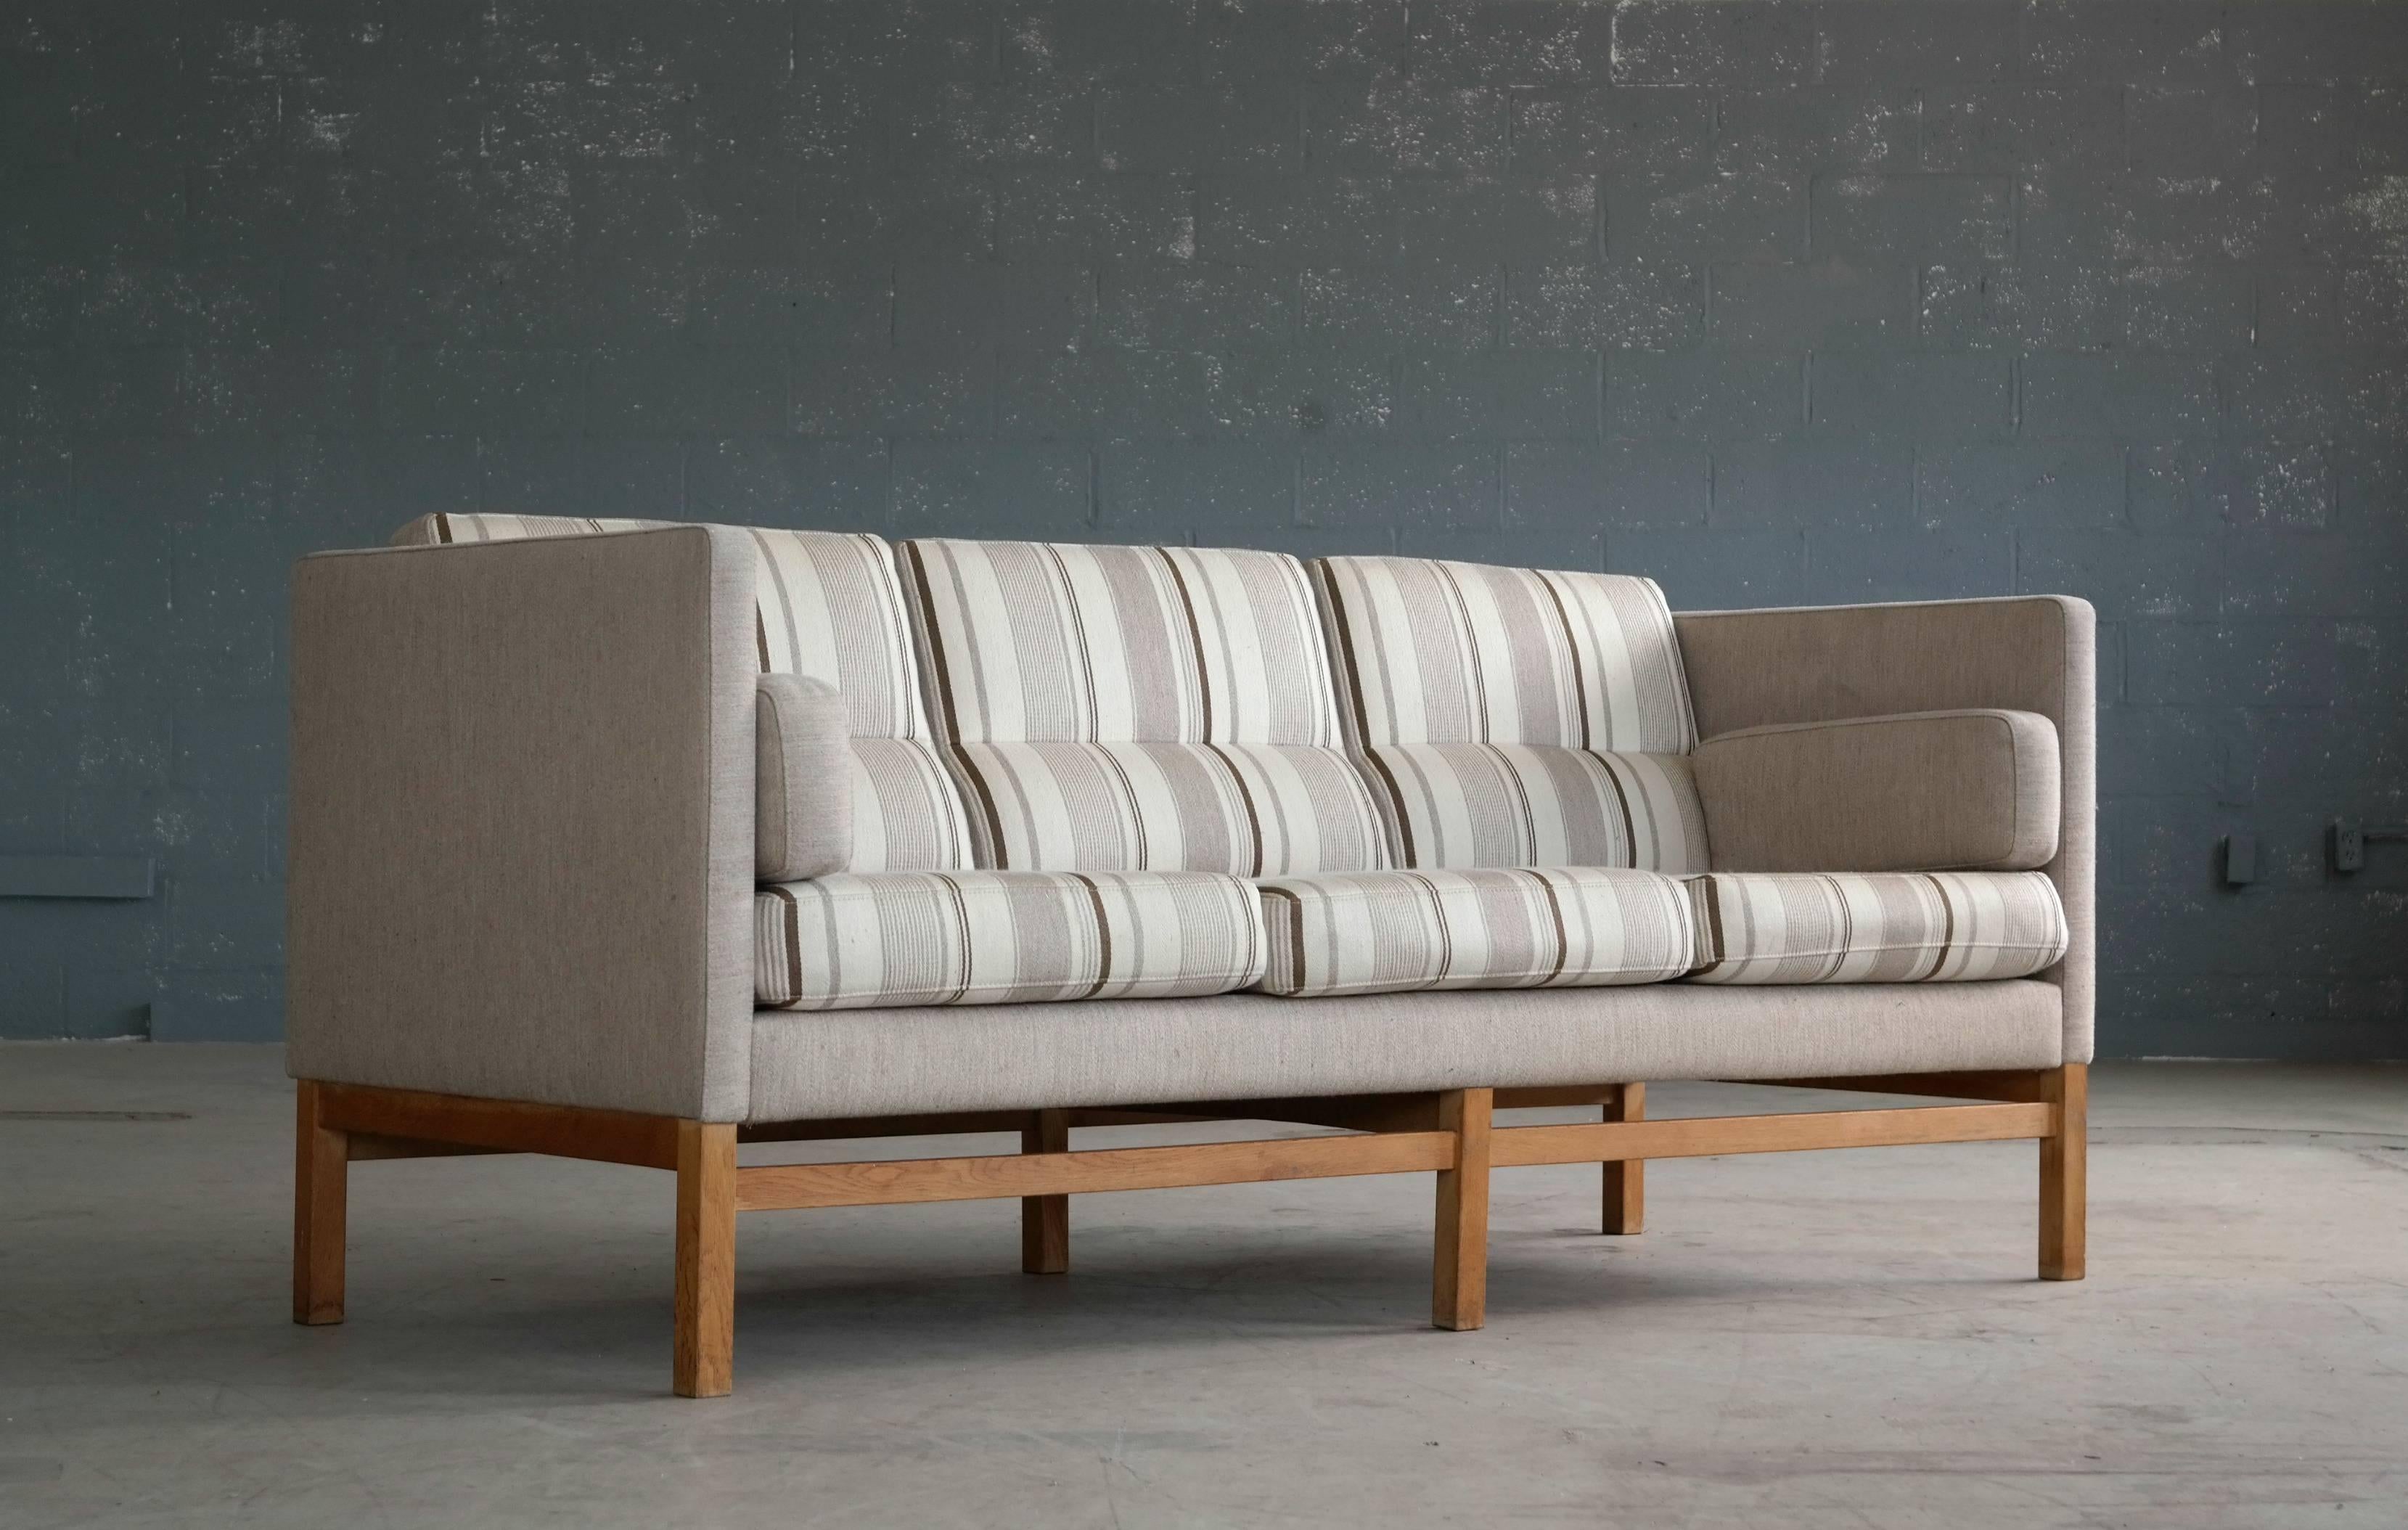 Very stylish Danish sofa in the style of Erik Jorgensen, 1975, equally straight-laced formal and playfully modern. High quality wool fabric and only very minor age appropriate wear. 
 